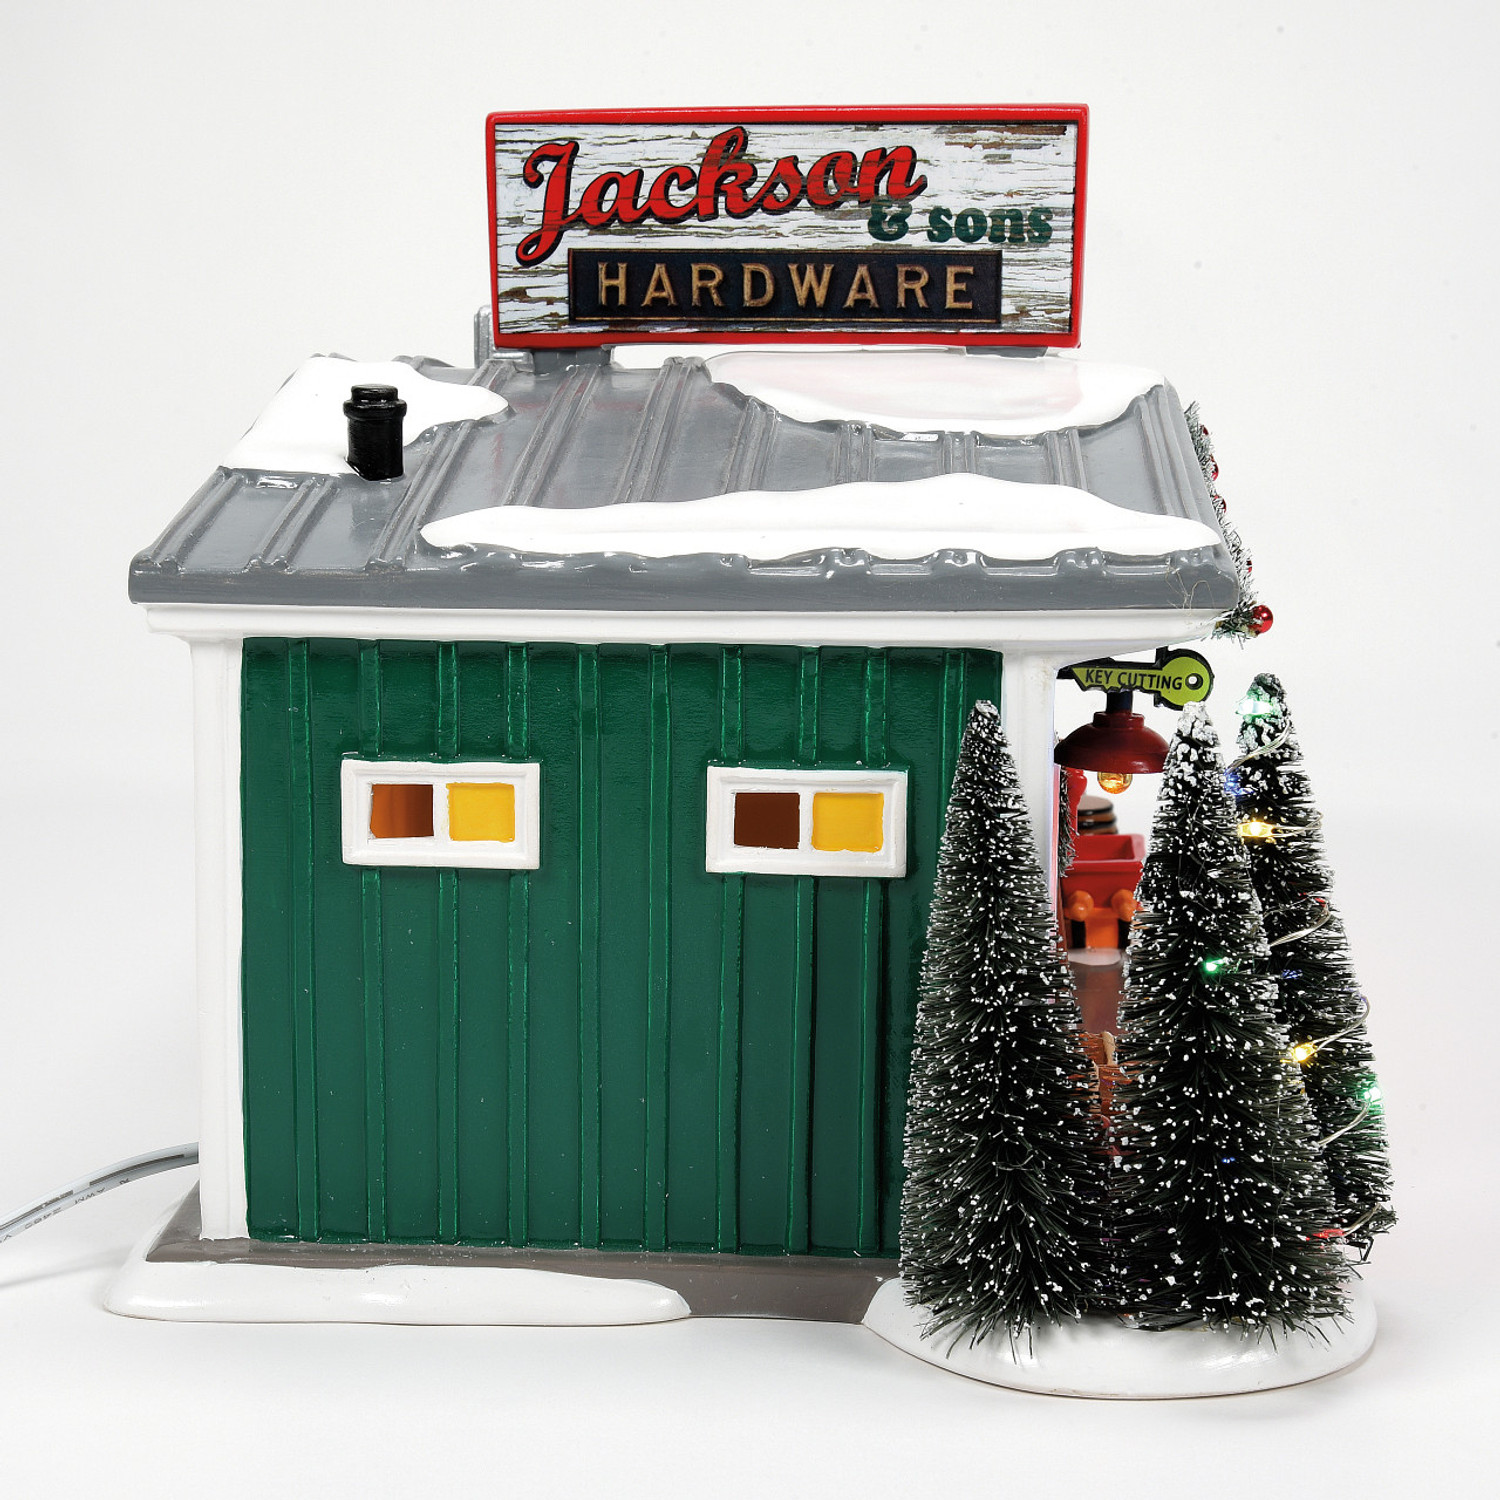 Department 56 First Edition Jackson & Son's Hardware